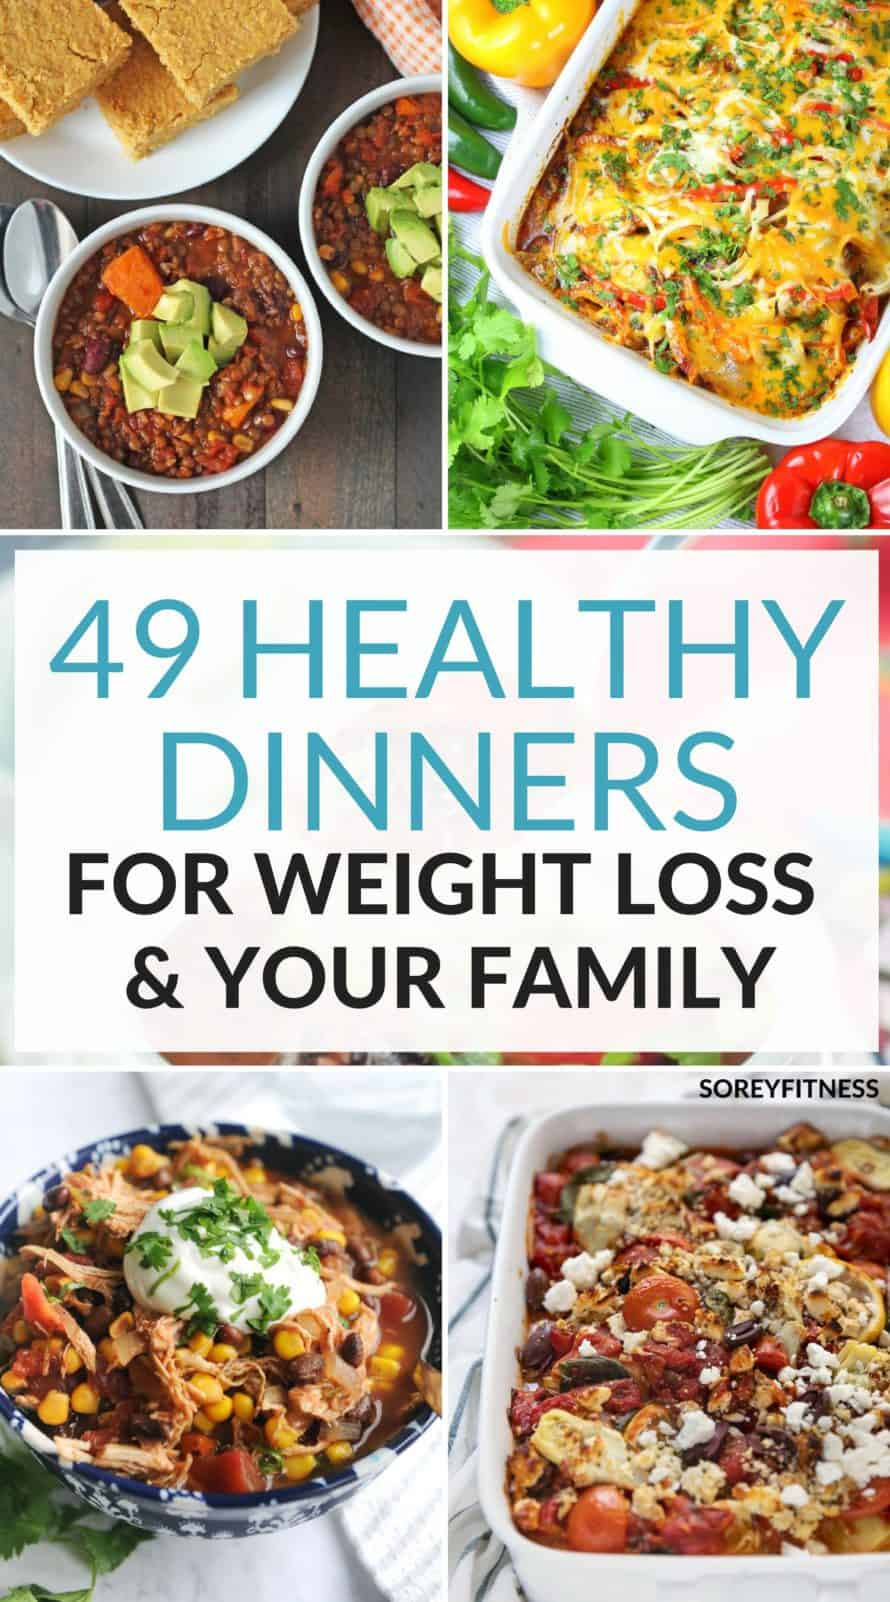 Quick Weight Loss Dinner
 Healthy Dinner Ideas For Weight Loss 49 Quick Easy Recipes